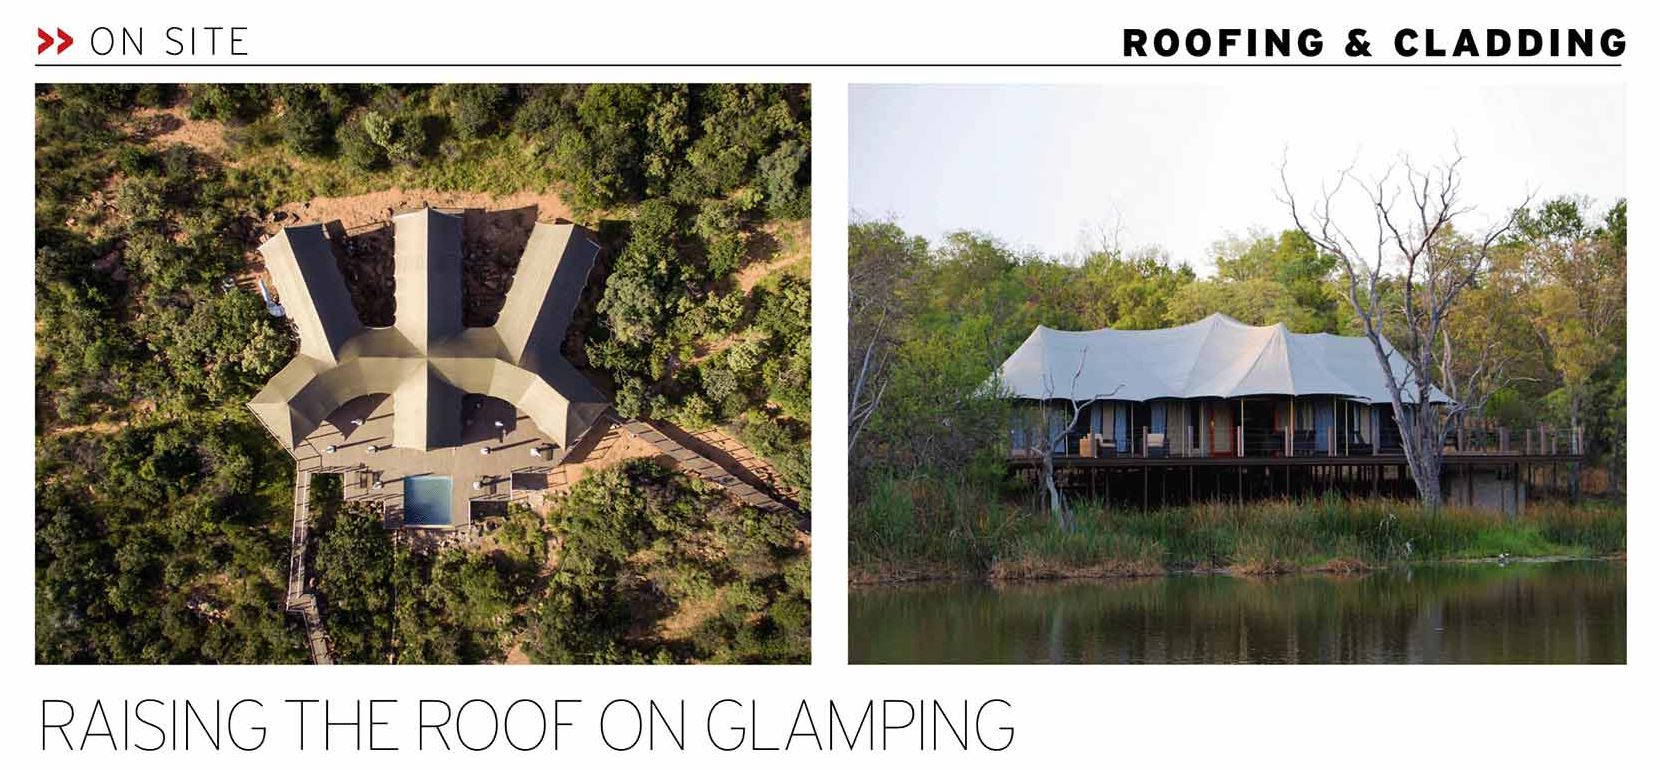 Raising The Roof on Glamping – Leading Architecture December 2019 / January 2020